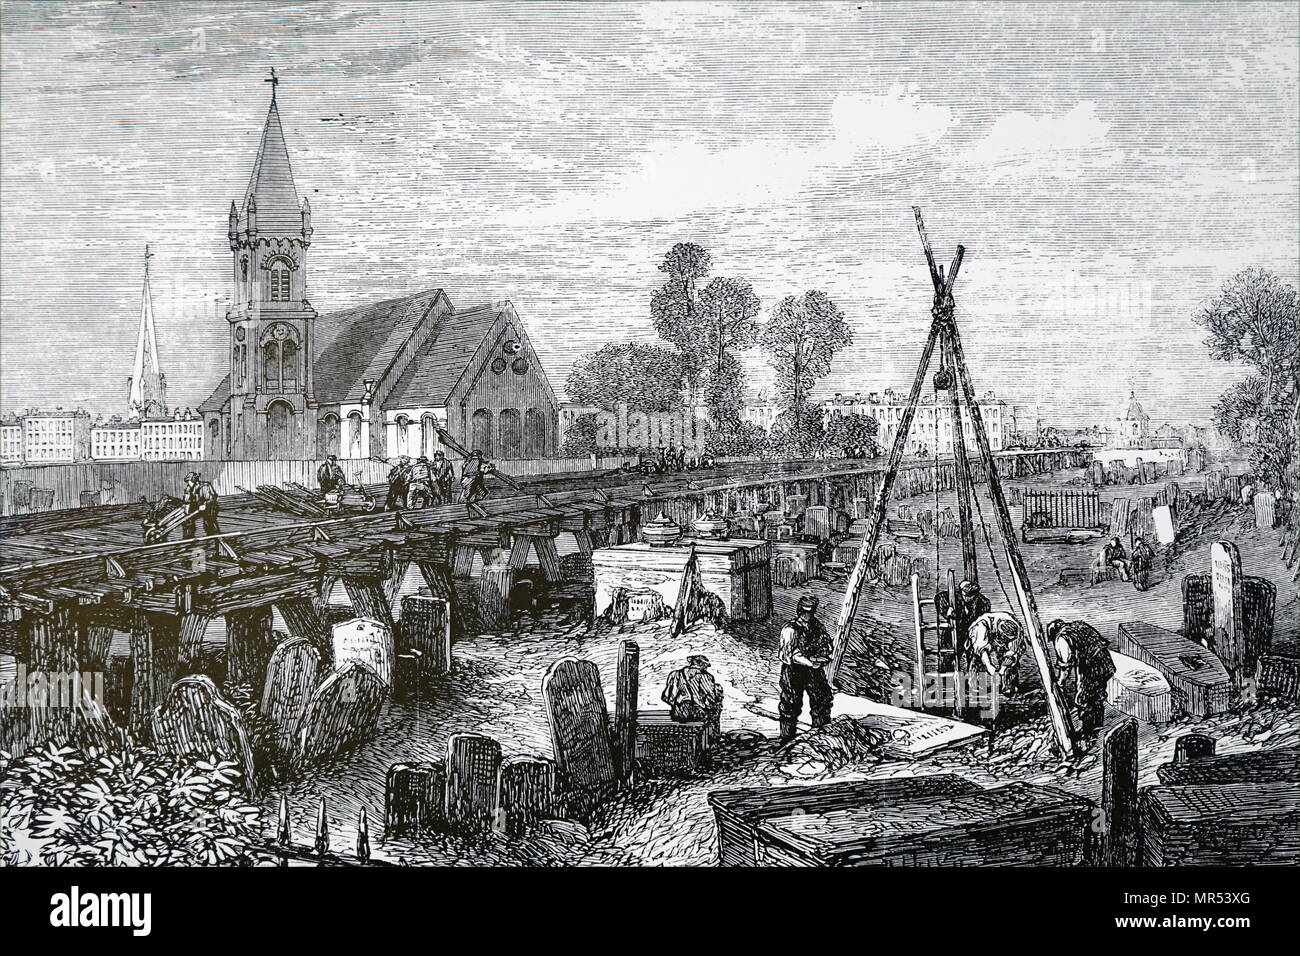 Engraving depicting the construction of the Midland railway track - work in progress in Old St Pancras Churchyard, London. Dated 19th century Stock Photo